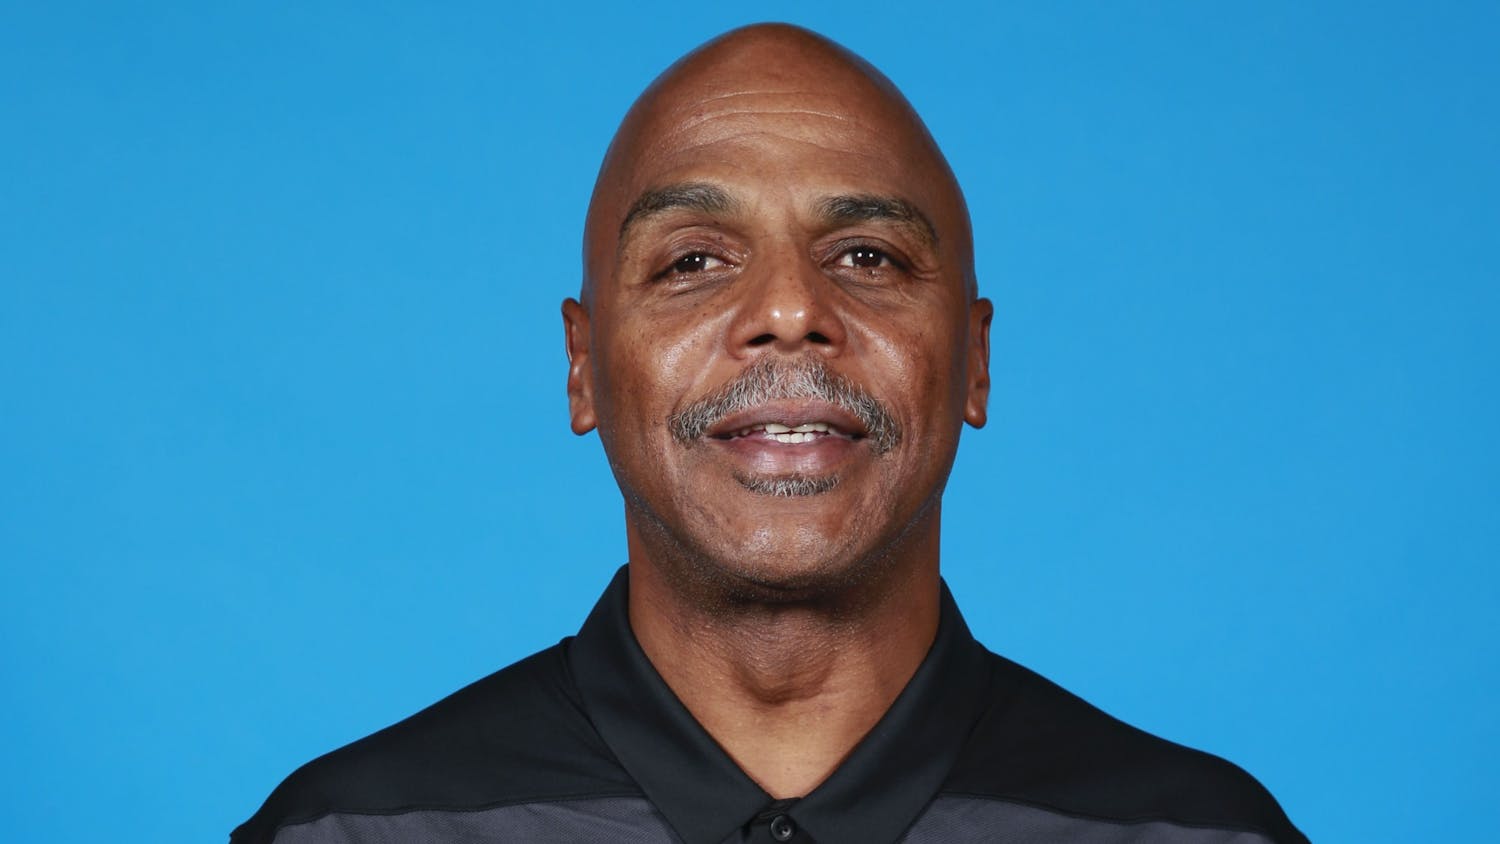 Armond Hill is photographed at Los Angeles Clippers media day on September 24, 2018 at Clippers Training Center in Playa Vista, California. Hill was named IU's Director of Basketball Administration on Wednesday.